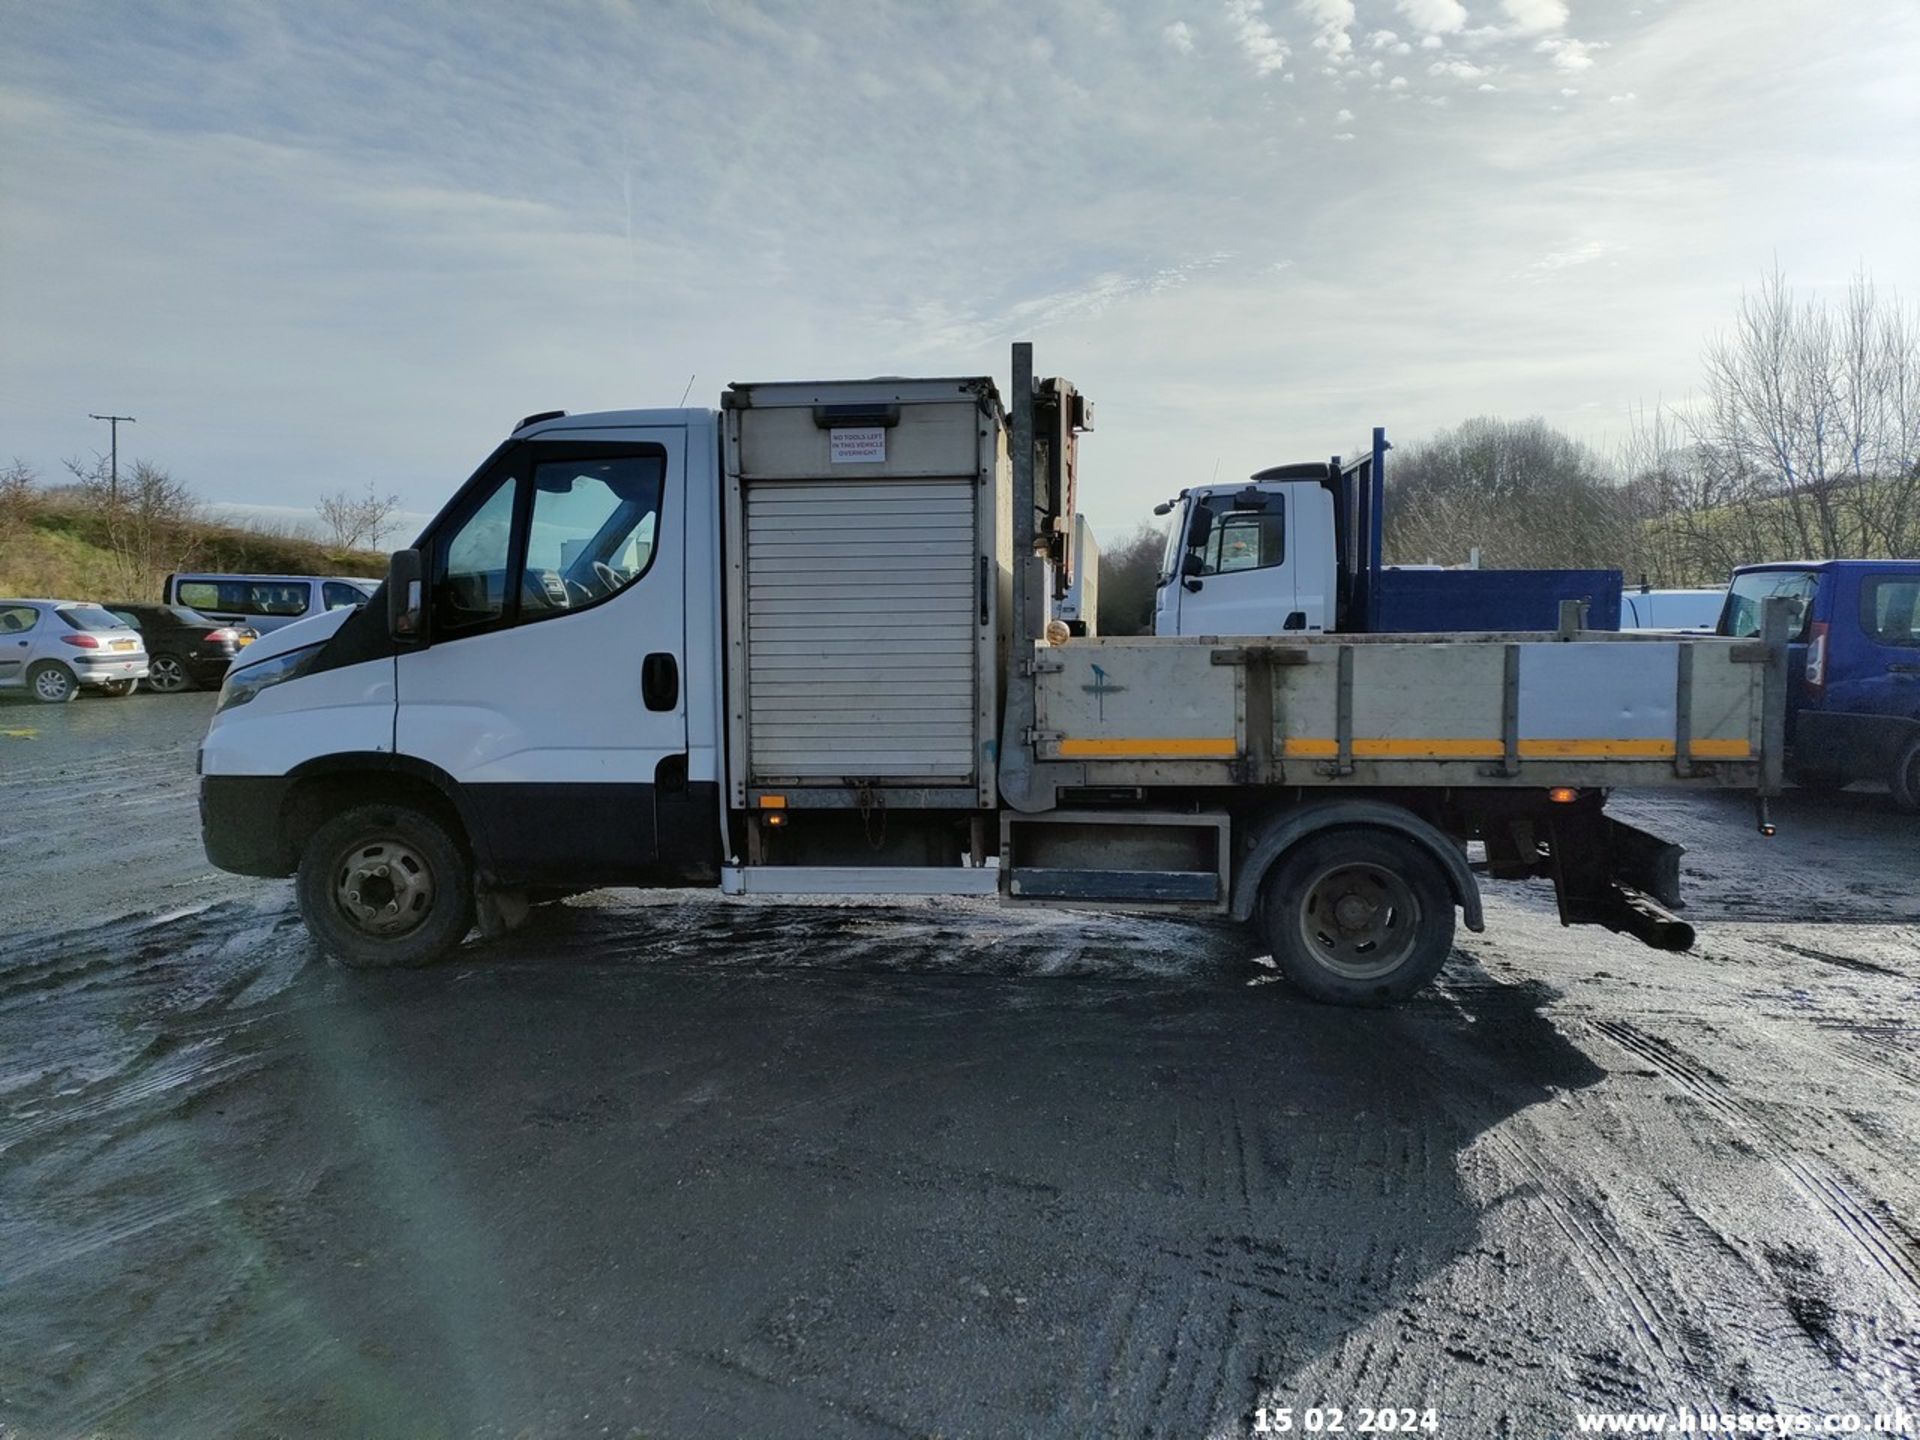 15/65 IVECO DAILY MWB - 2998cc 2dr Tipper (White) - Image 17 of 38